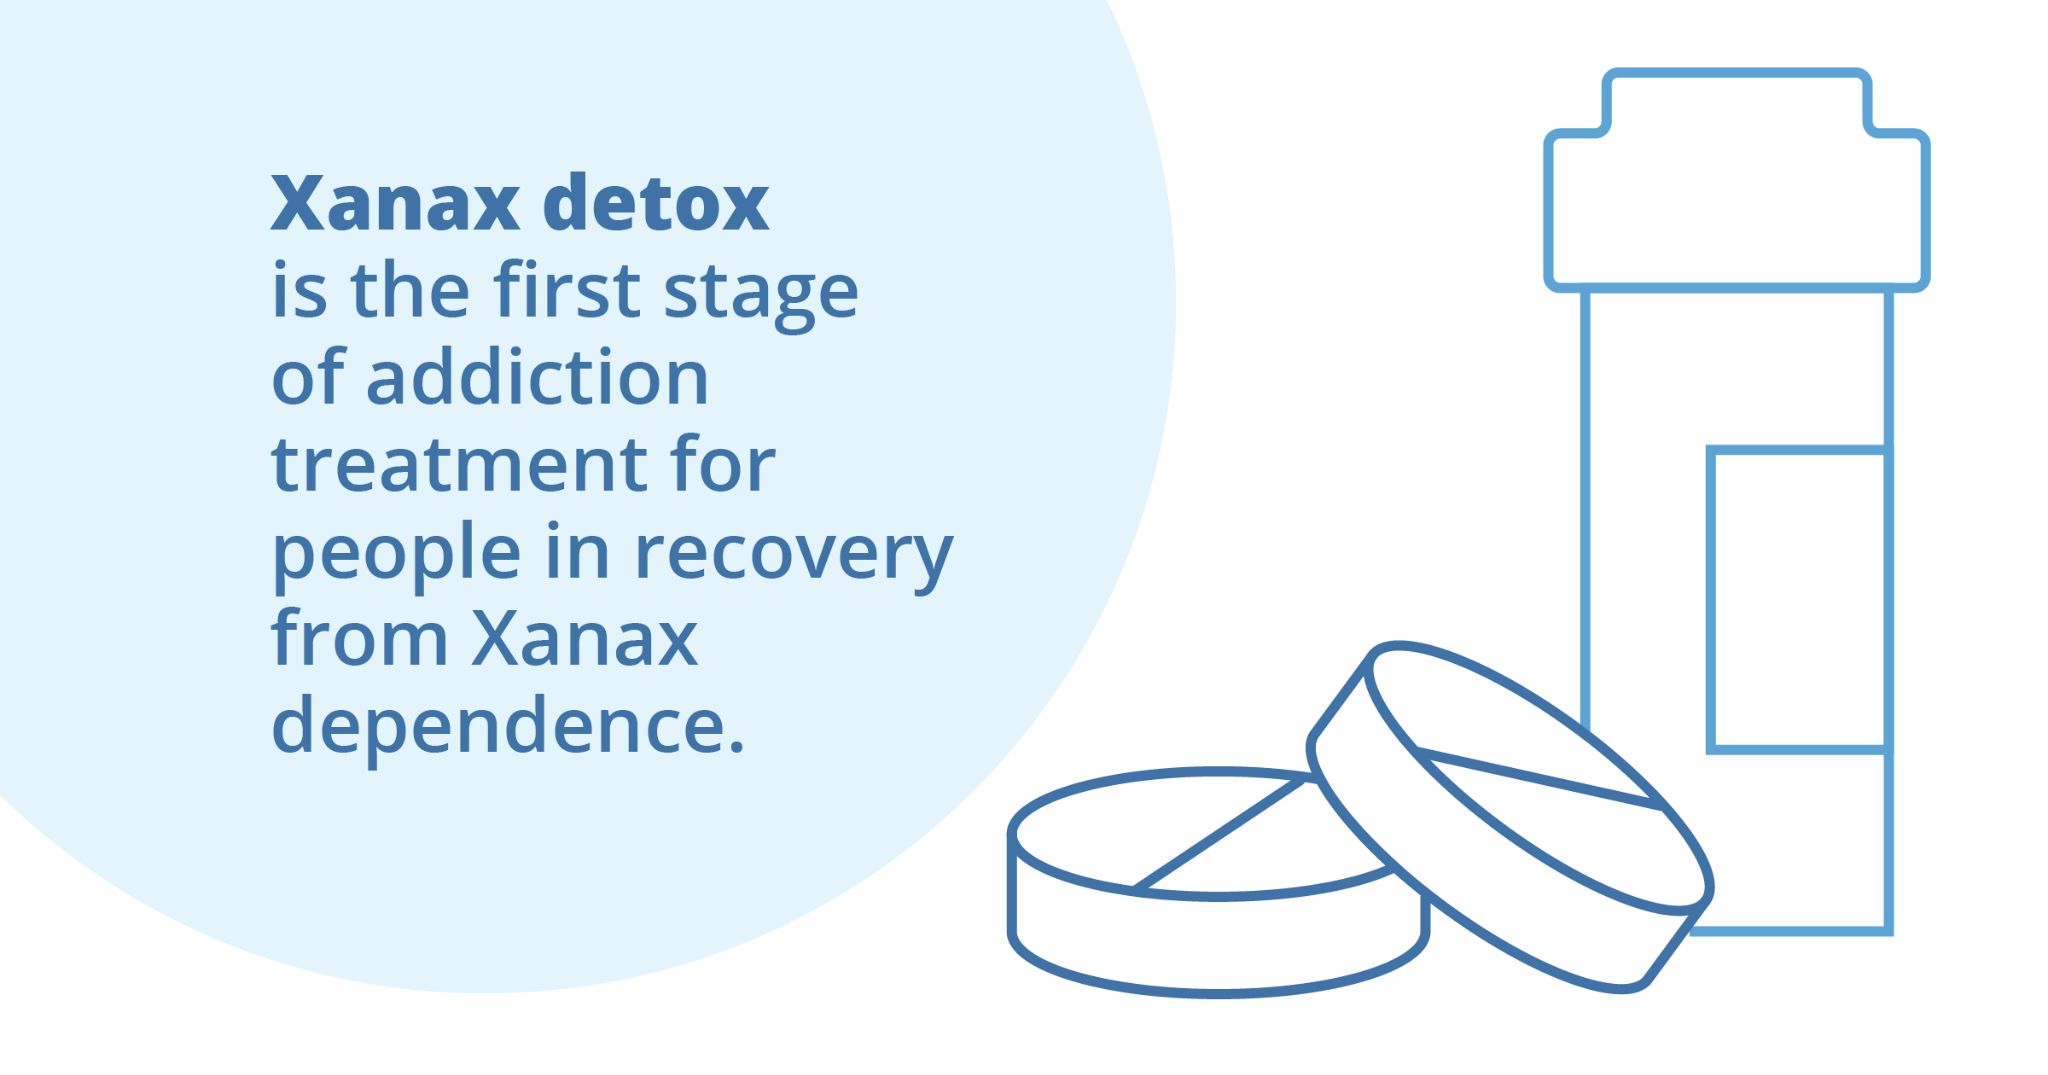 xanax detox is the first stage of addiction treatment for people in recoveryfrom xanax dependance 